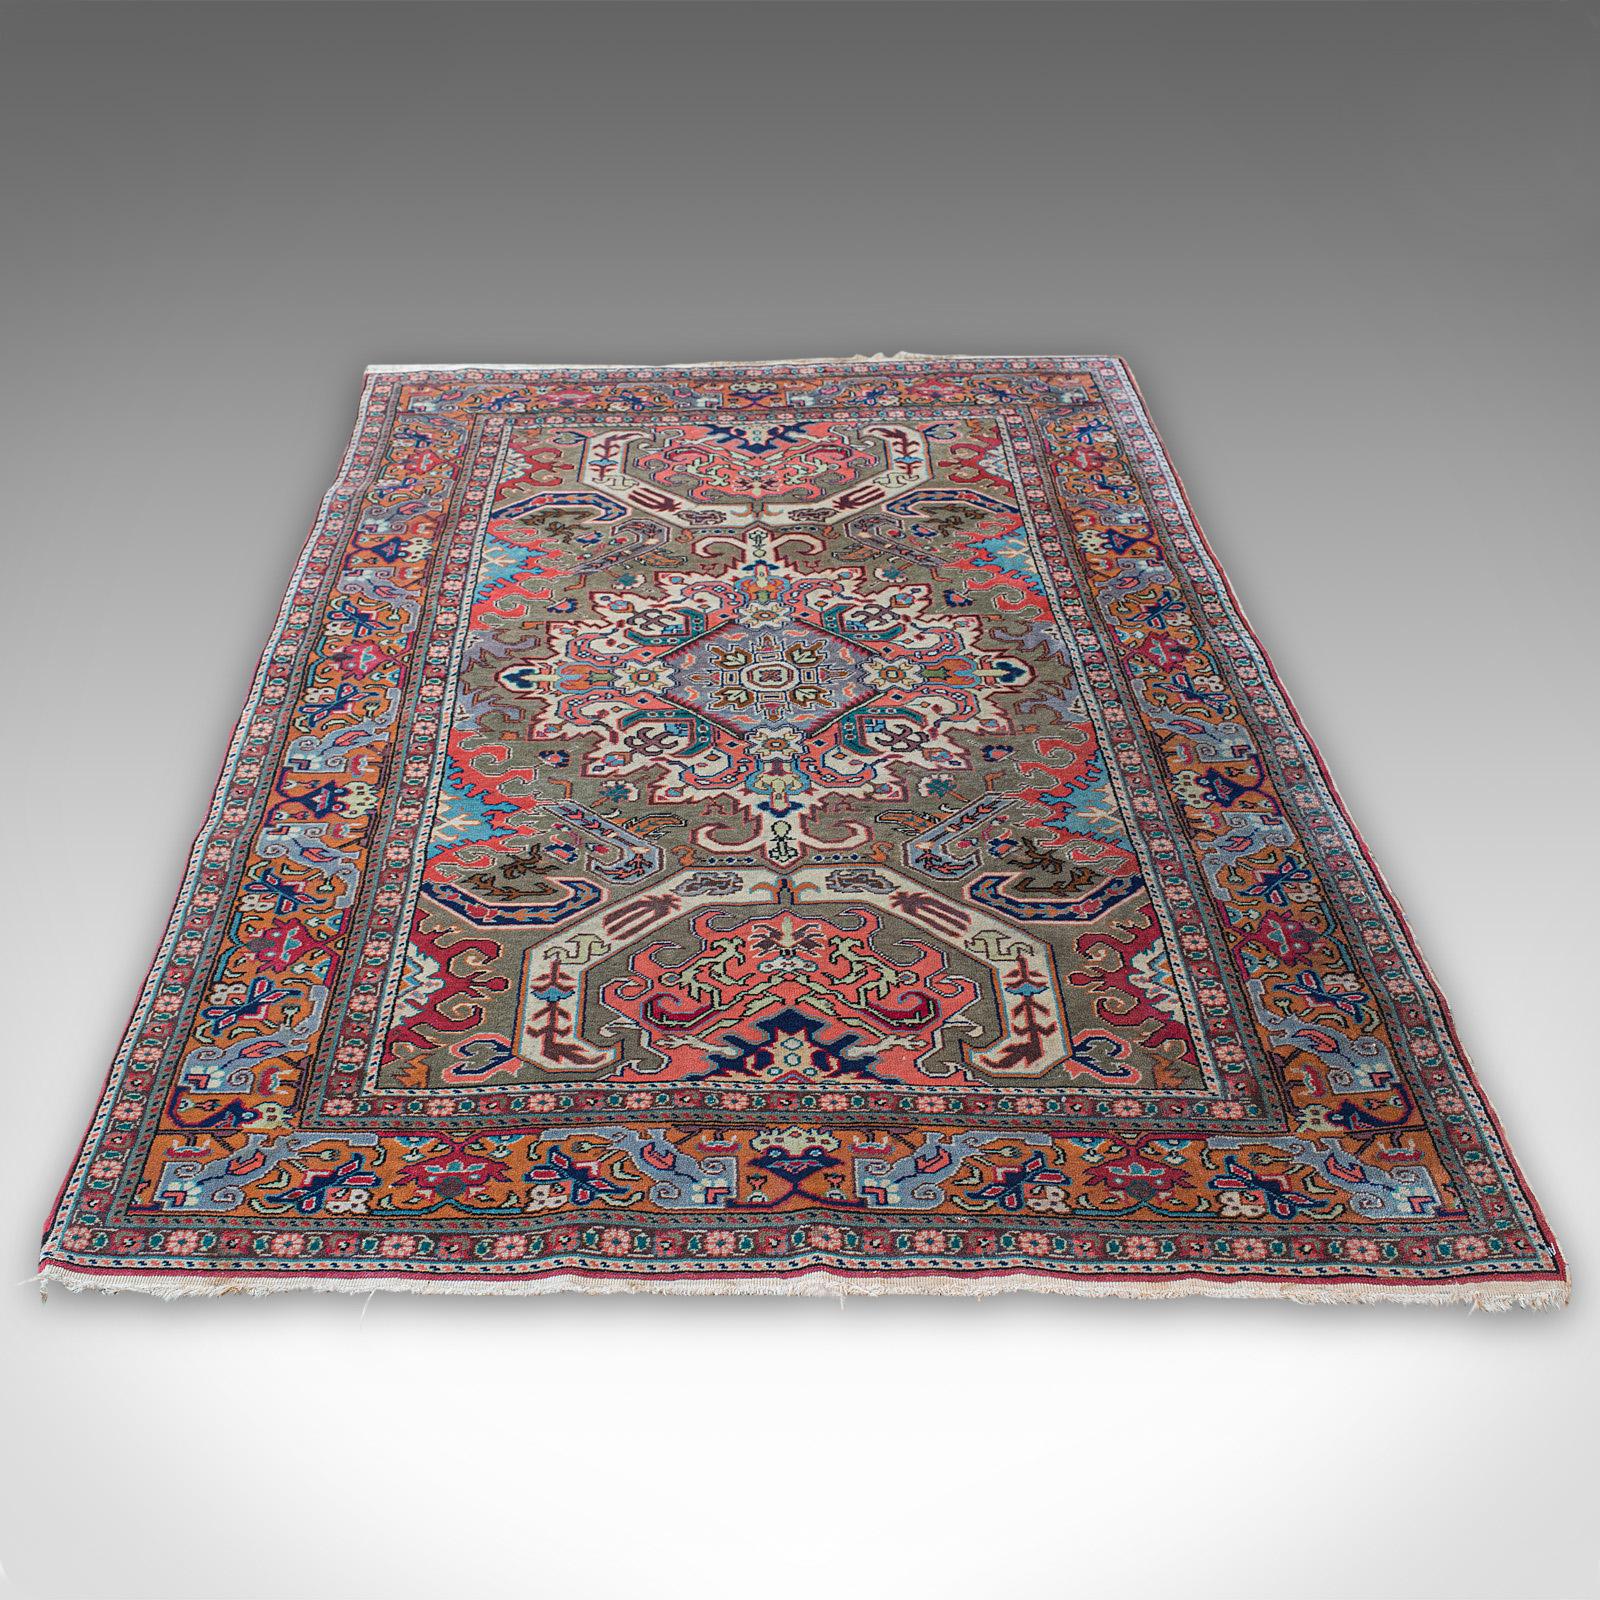 This is a vintage Erivan rug. A Caucasian, woven hall or living room carpet, dating to the late 20th century, circa 1980.

Of similar size to a traditional Dozar at 119cm (46.75